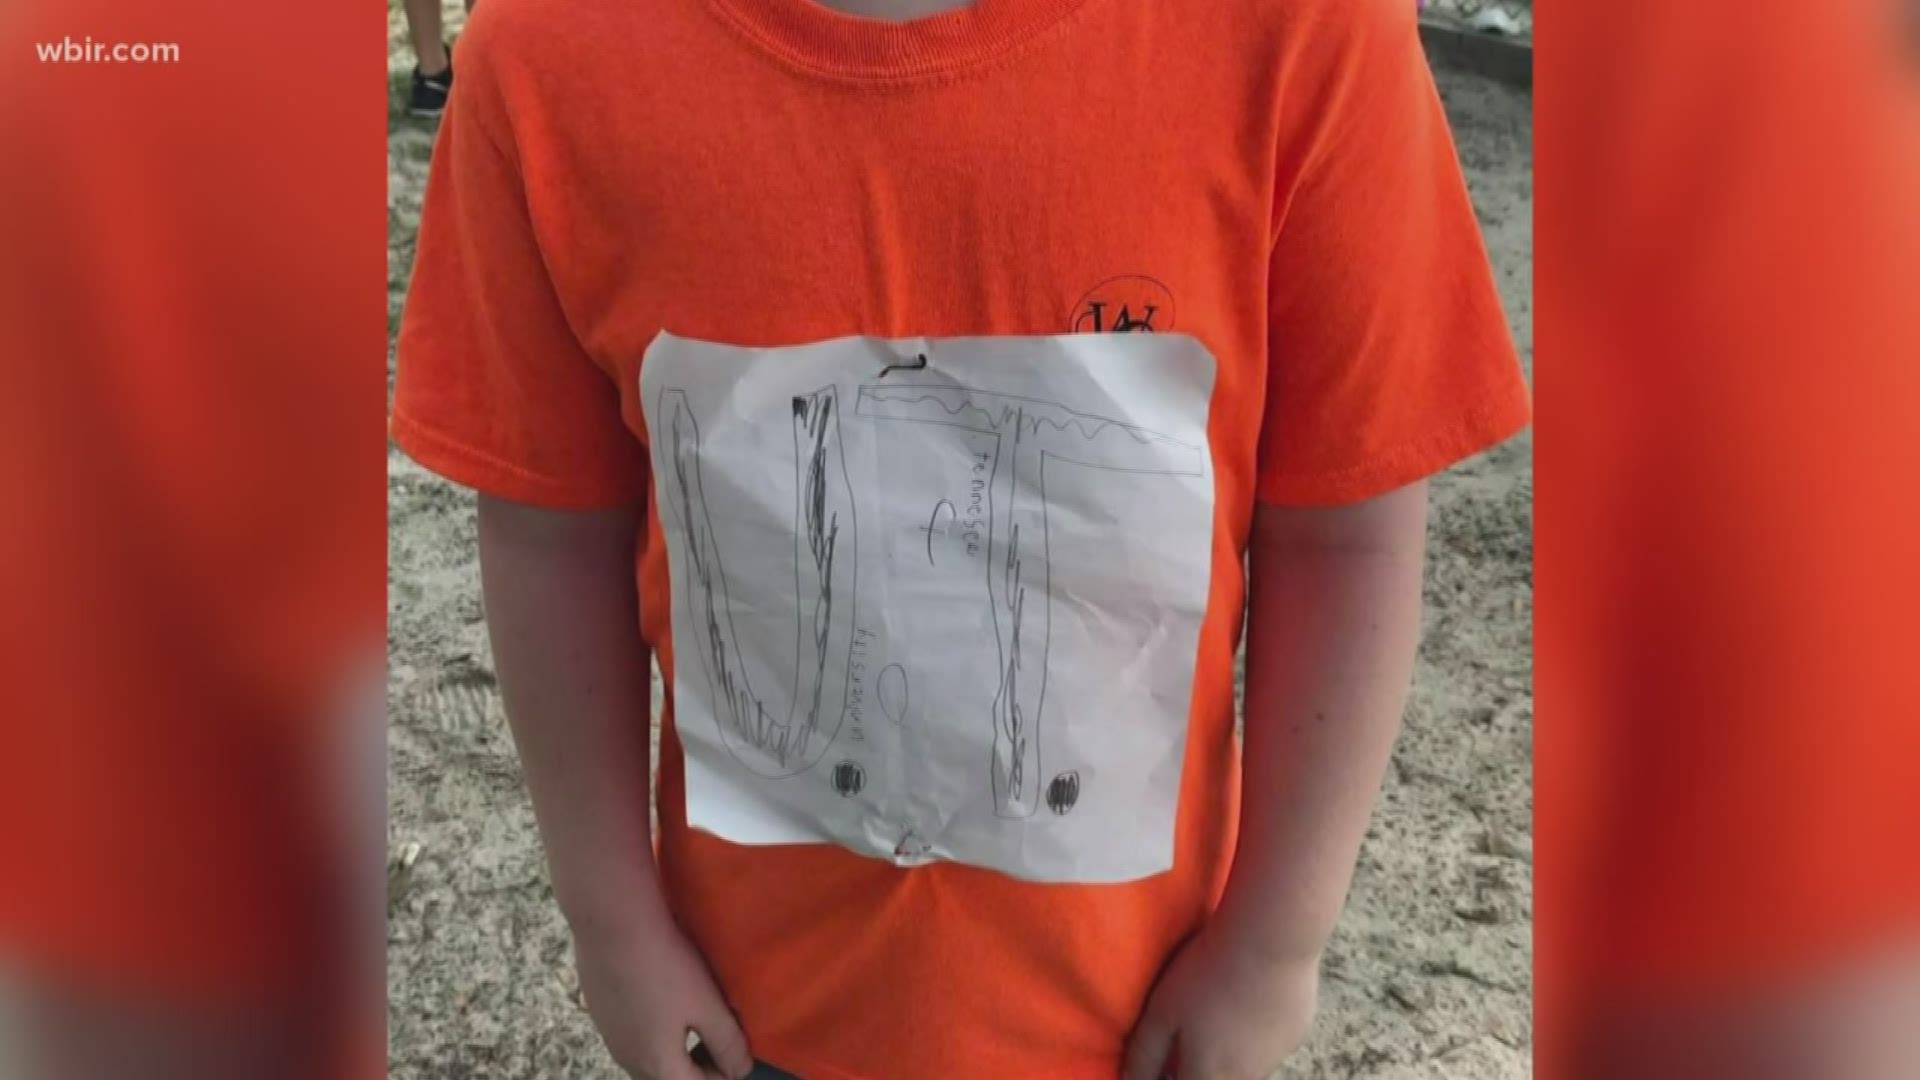 The young Vol fan proudly wore a drawing of the UT logo to school, but things took a sad turn at lunch when kids made fun of it. So, the Vol Shop and other departments on campus got together to get him some proper Vol gear.